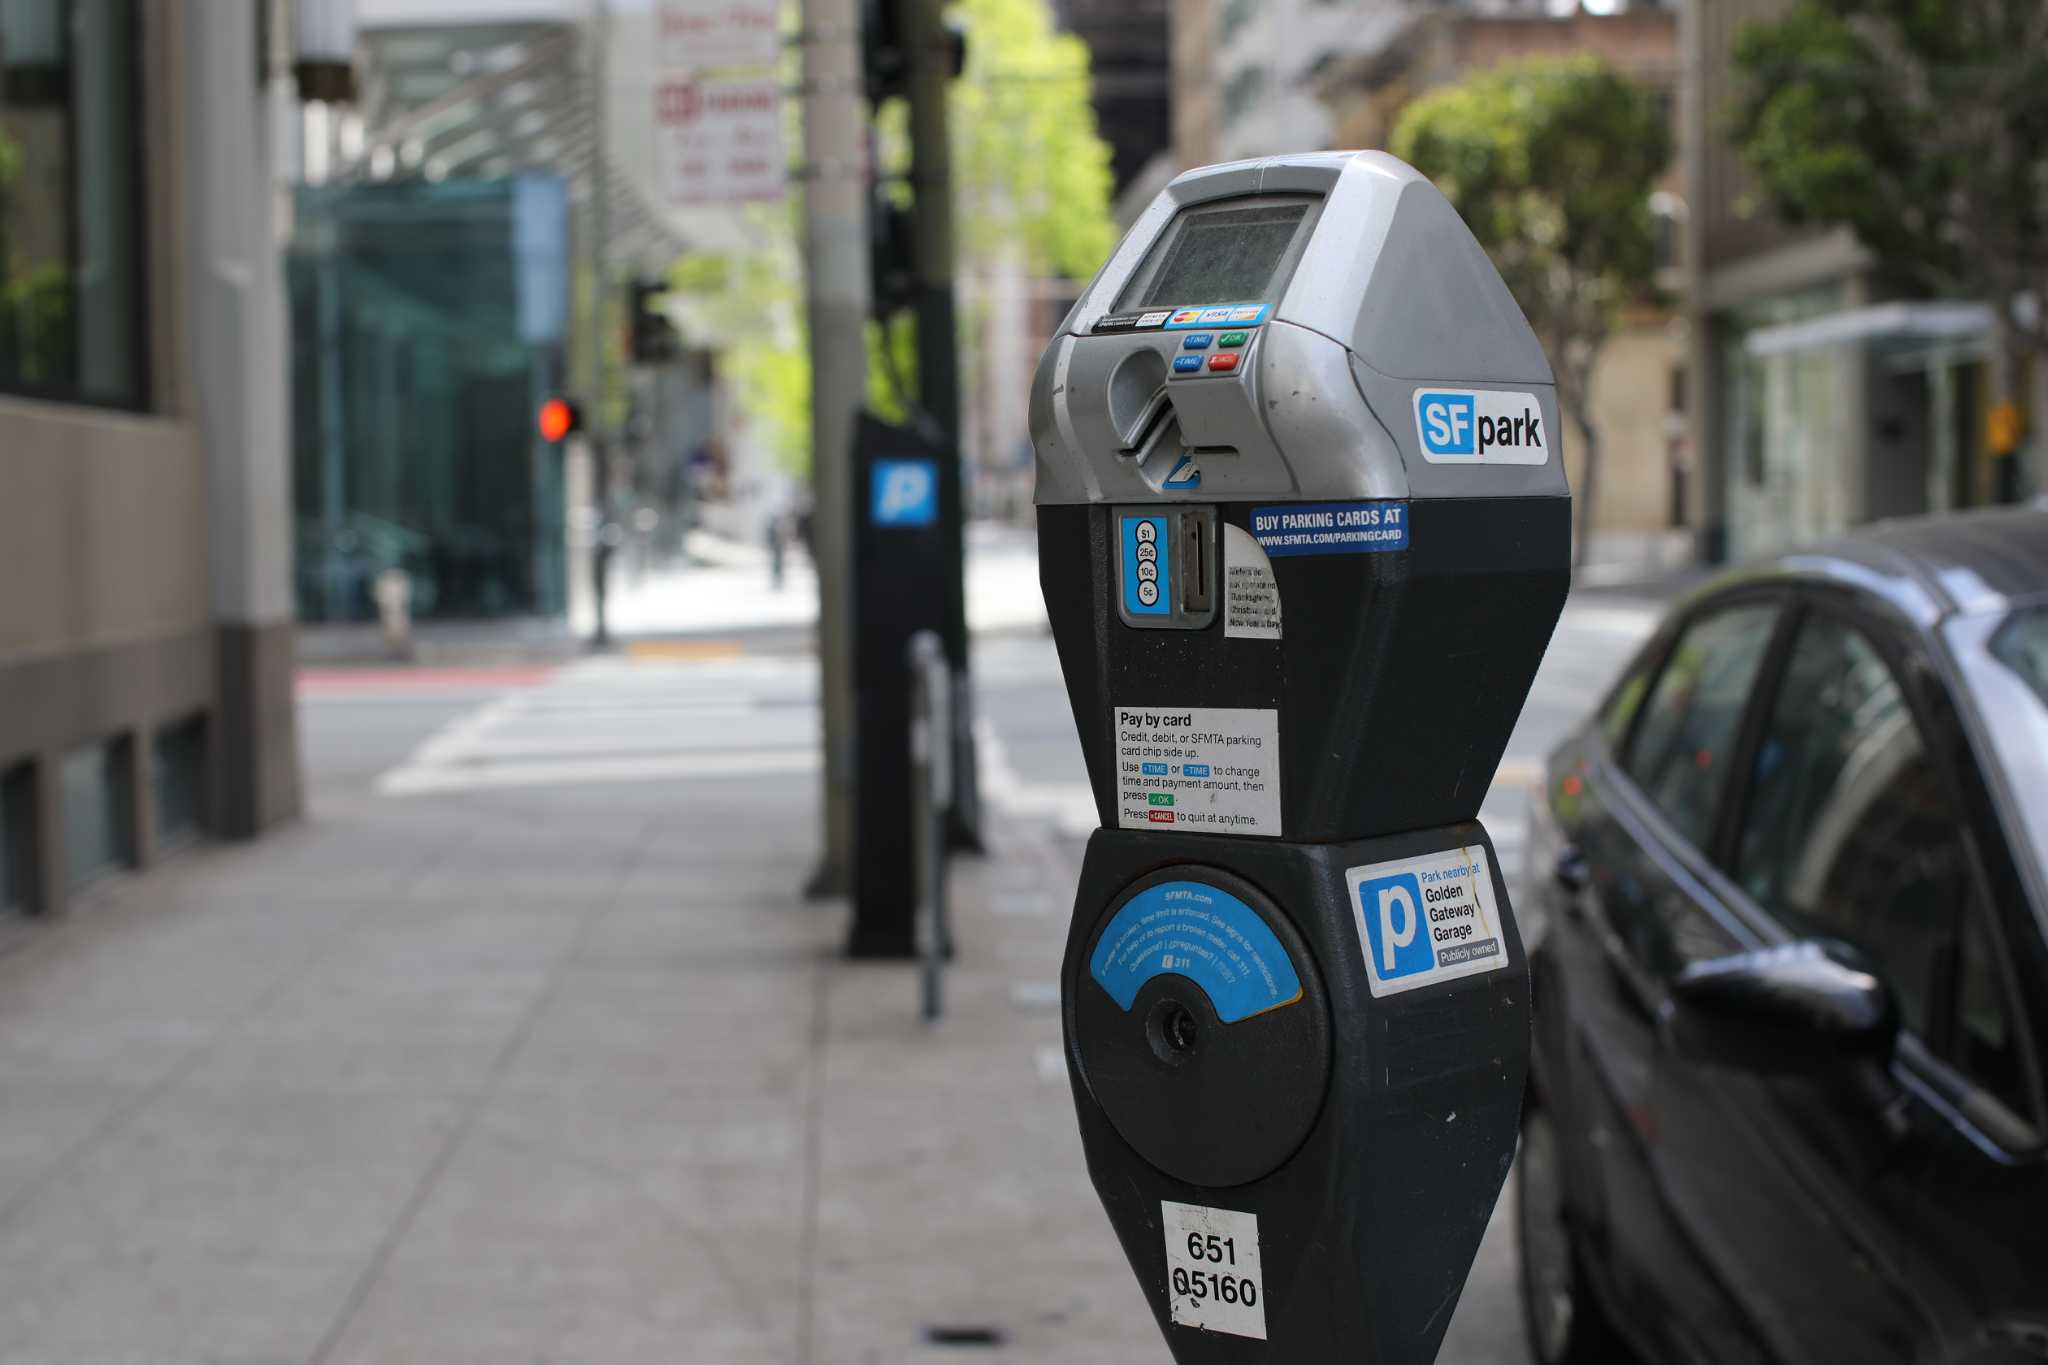 S.F. will extend metered parking hours starting this summer. Here are the details